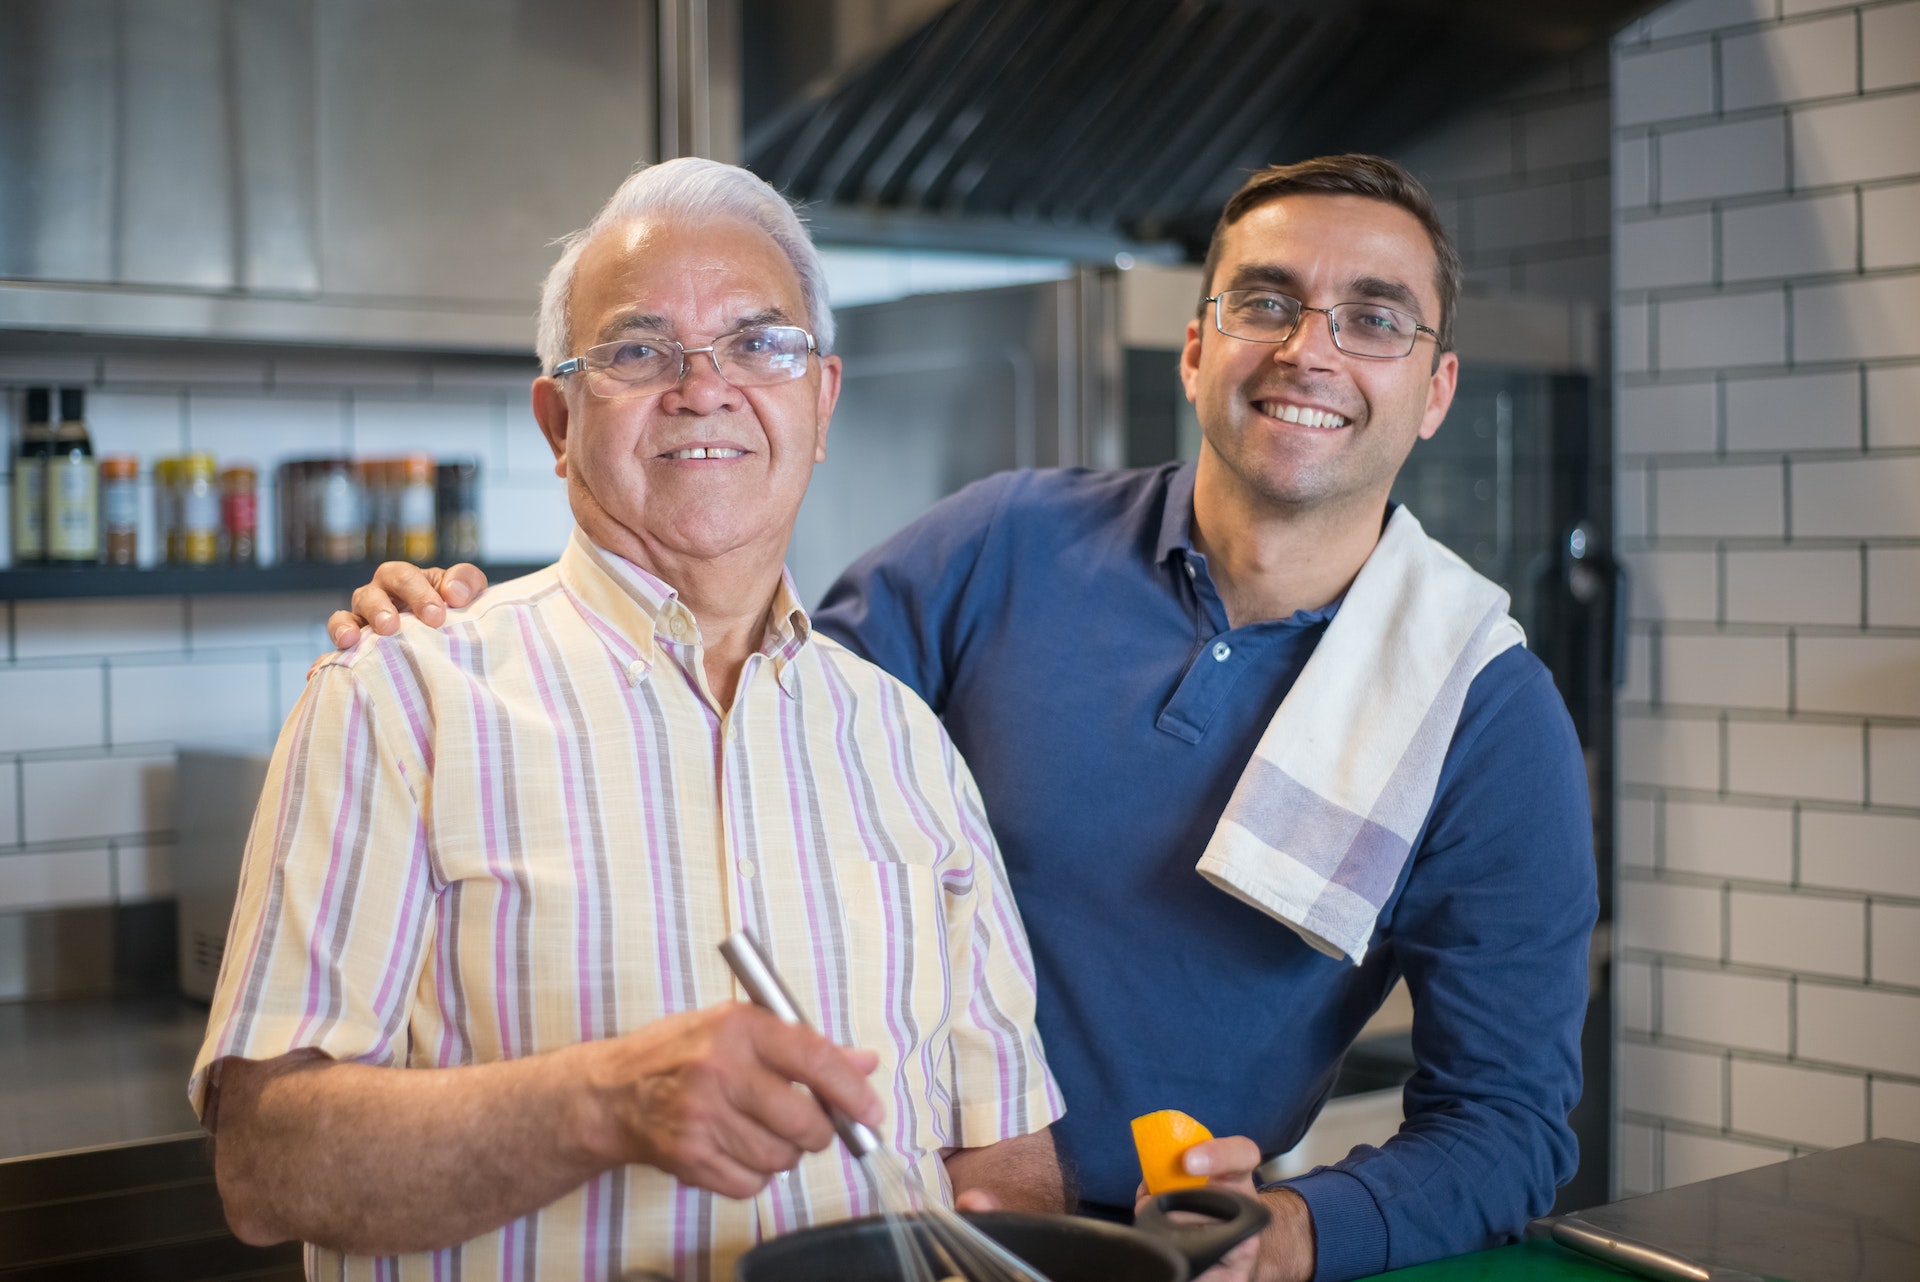 adult son cooking with his elderly father